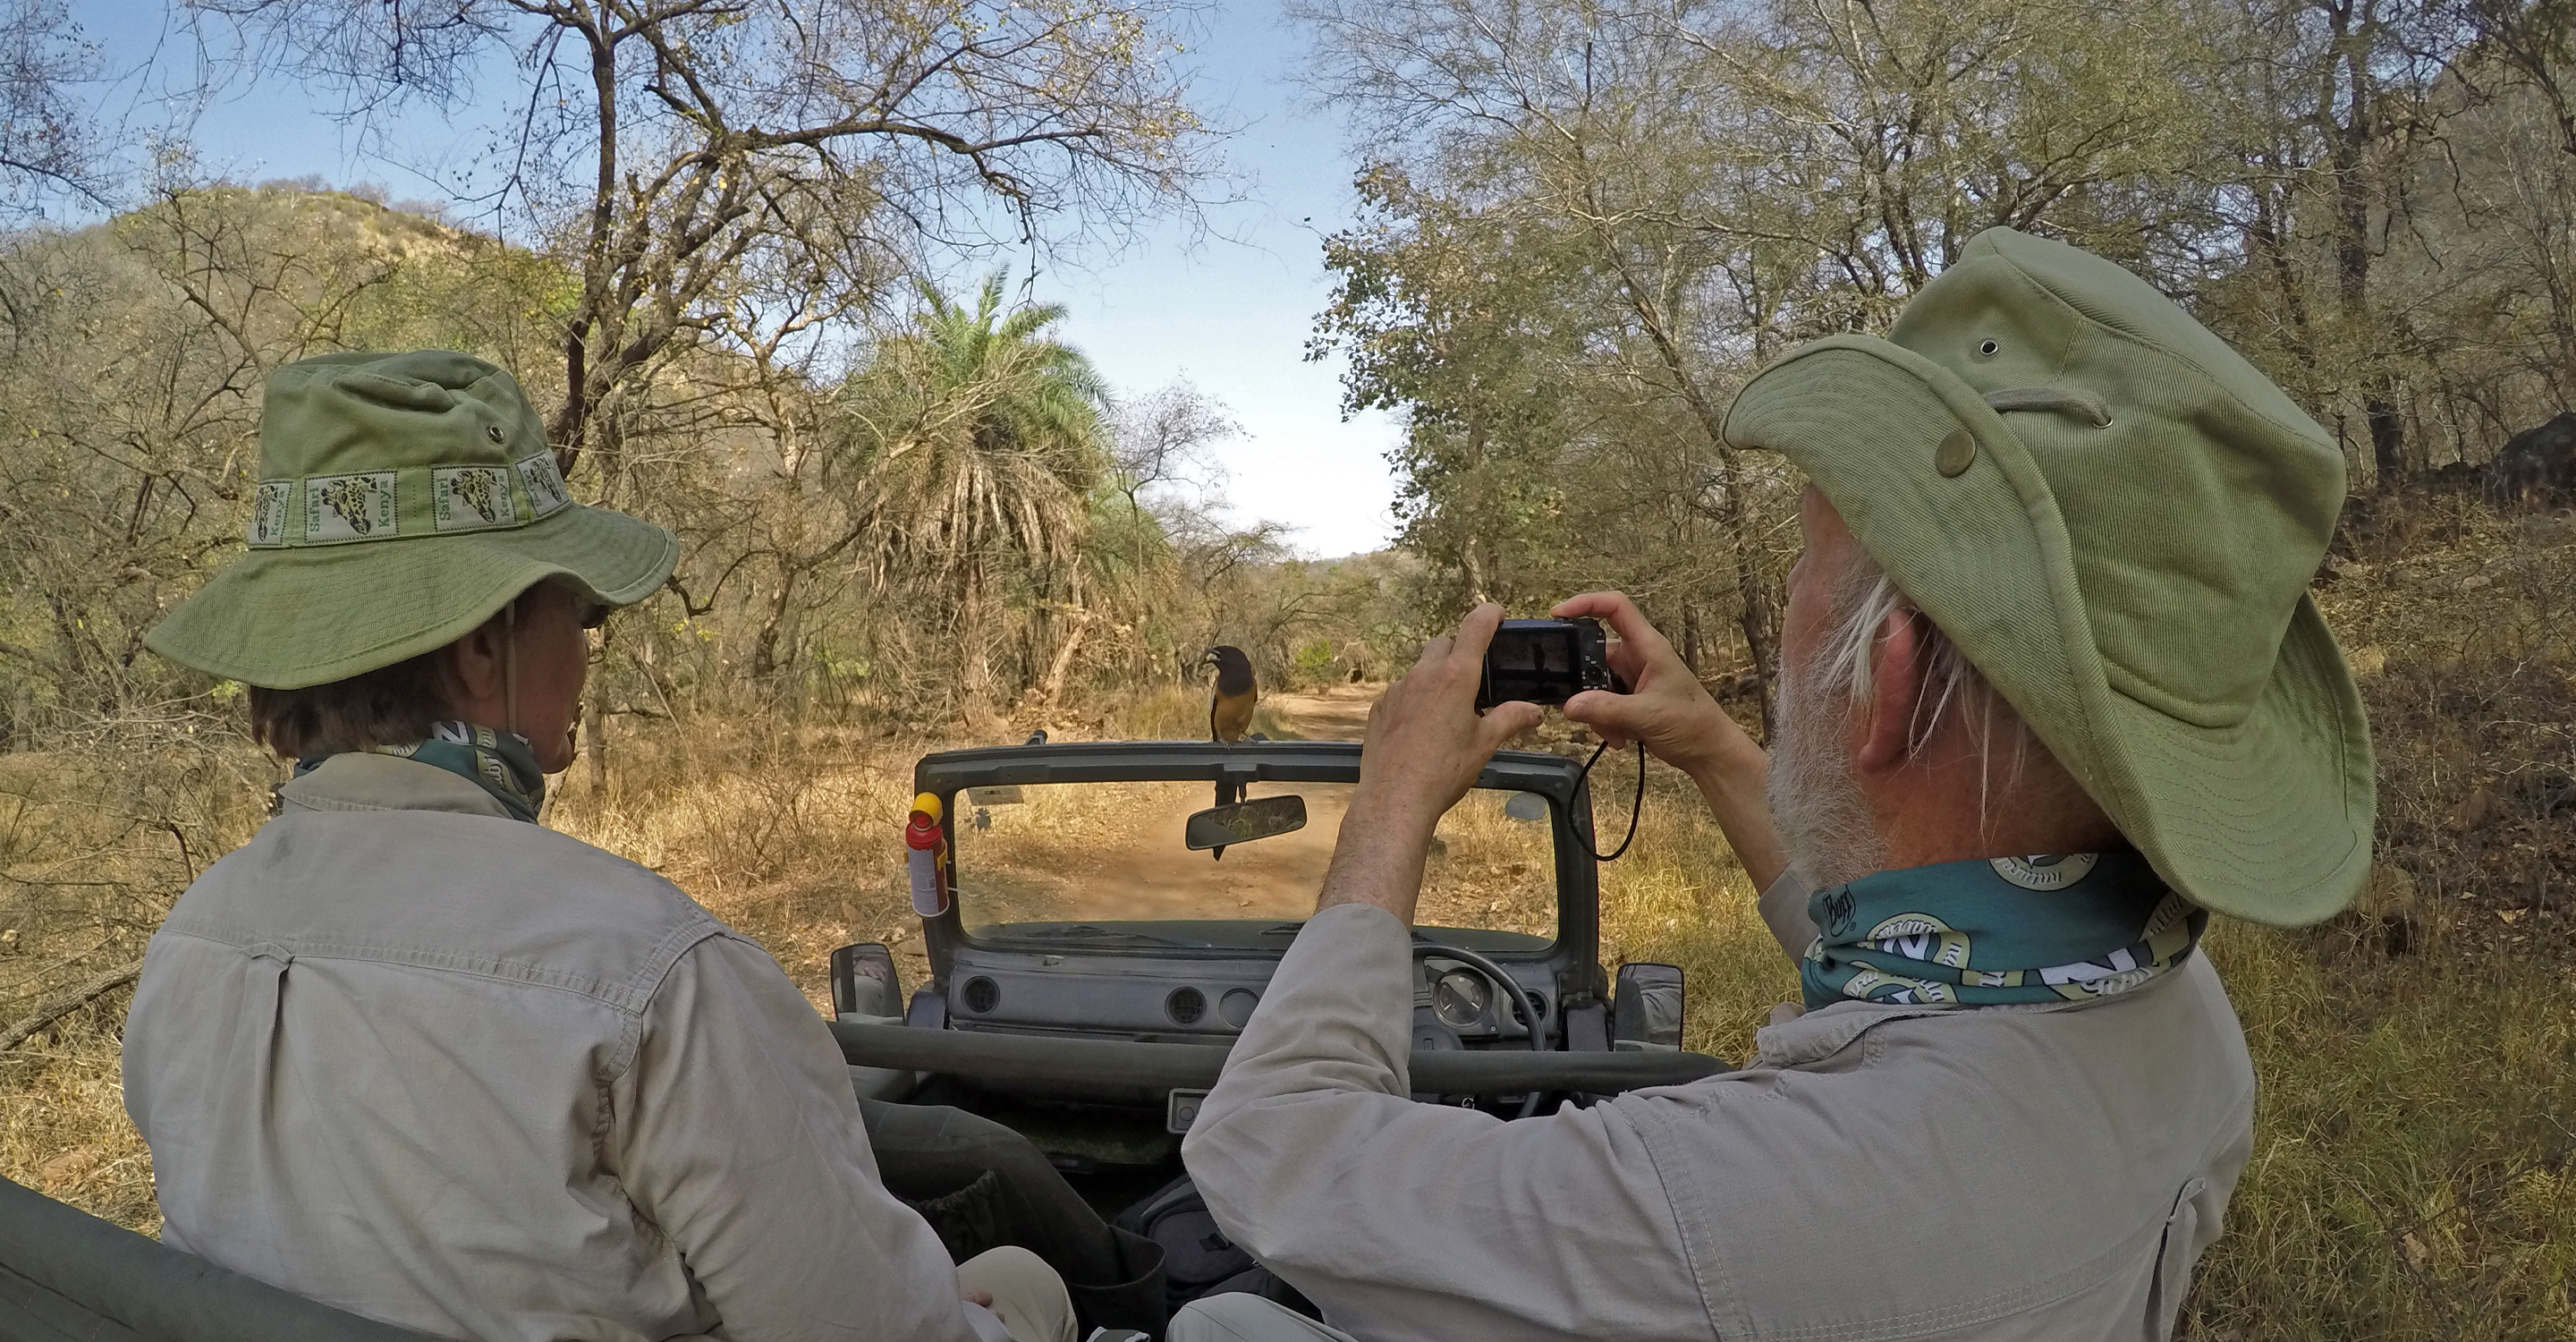 Two Natural Habitat Adventures travelers photograph a bird that landed on their safari vehicle in Ranthambore National Park, India